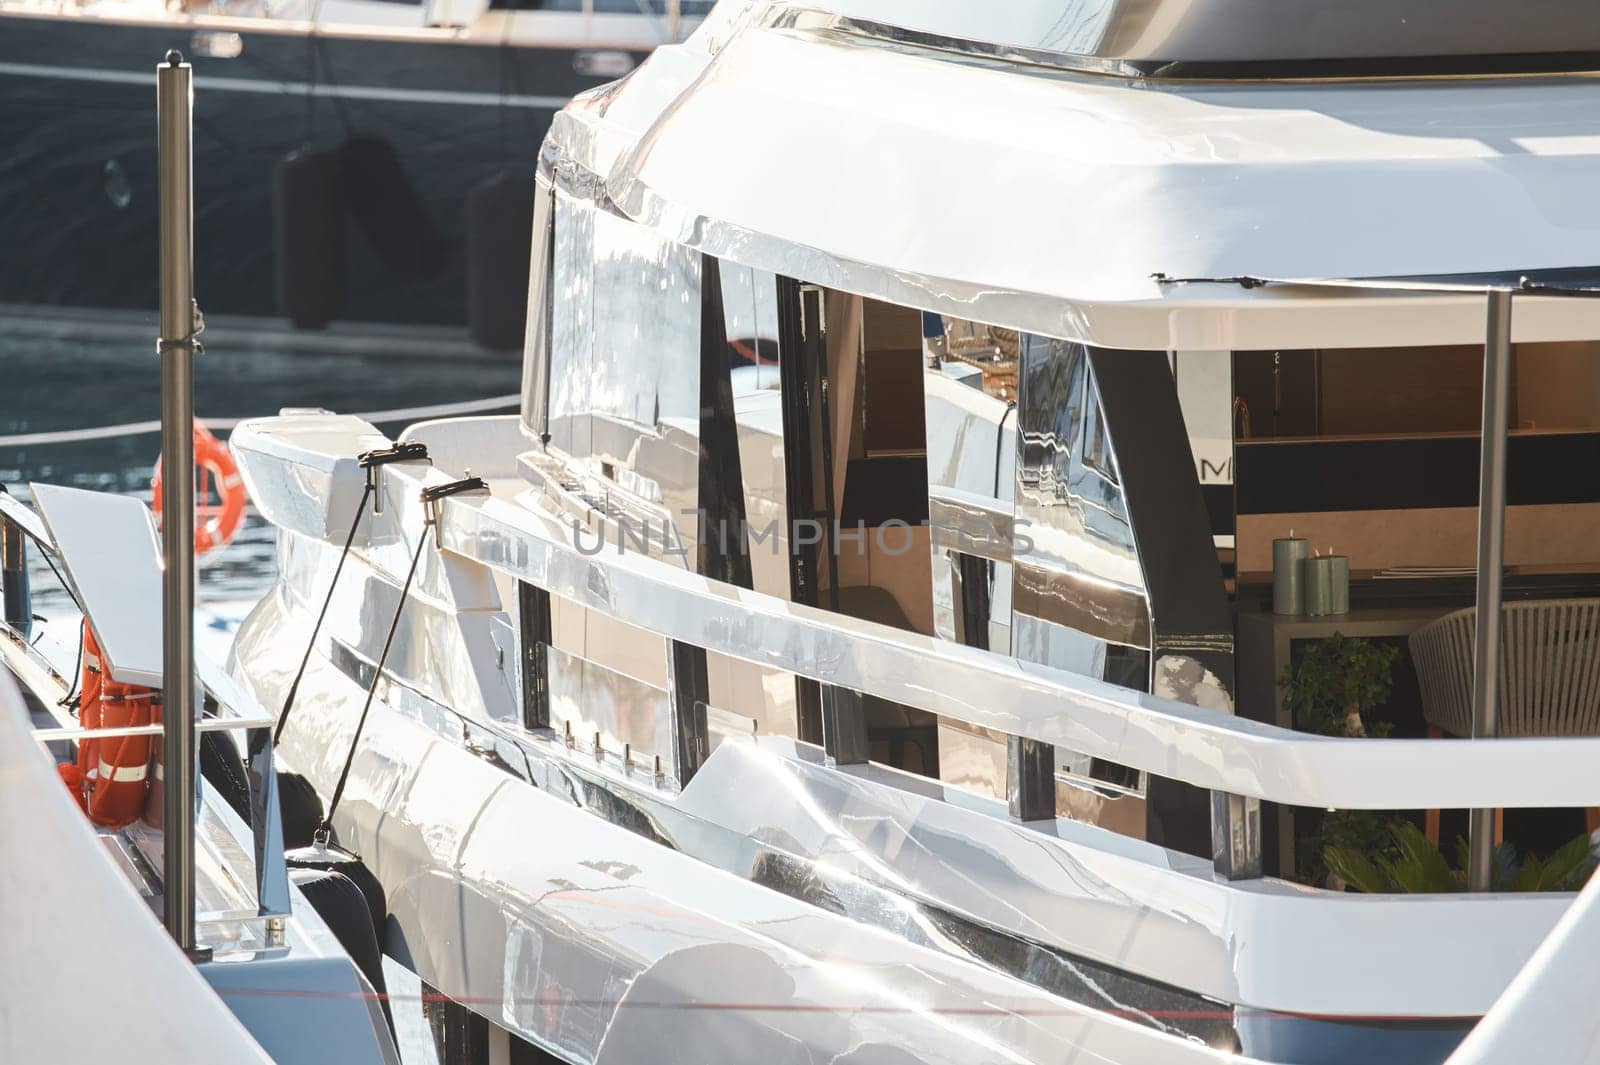 Close up footage of a relaxation area on the open teak deck of an expensive megayacht at sunny day, with awnings stretched over the deck to protect from the sun, wealth life, table and chairs. High quality photo